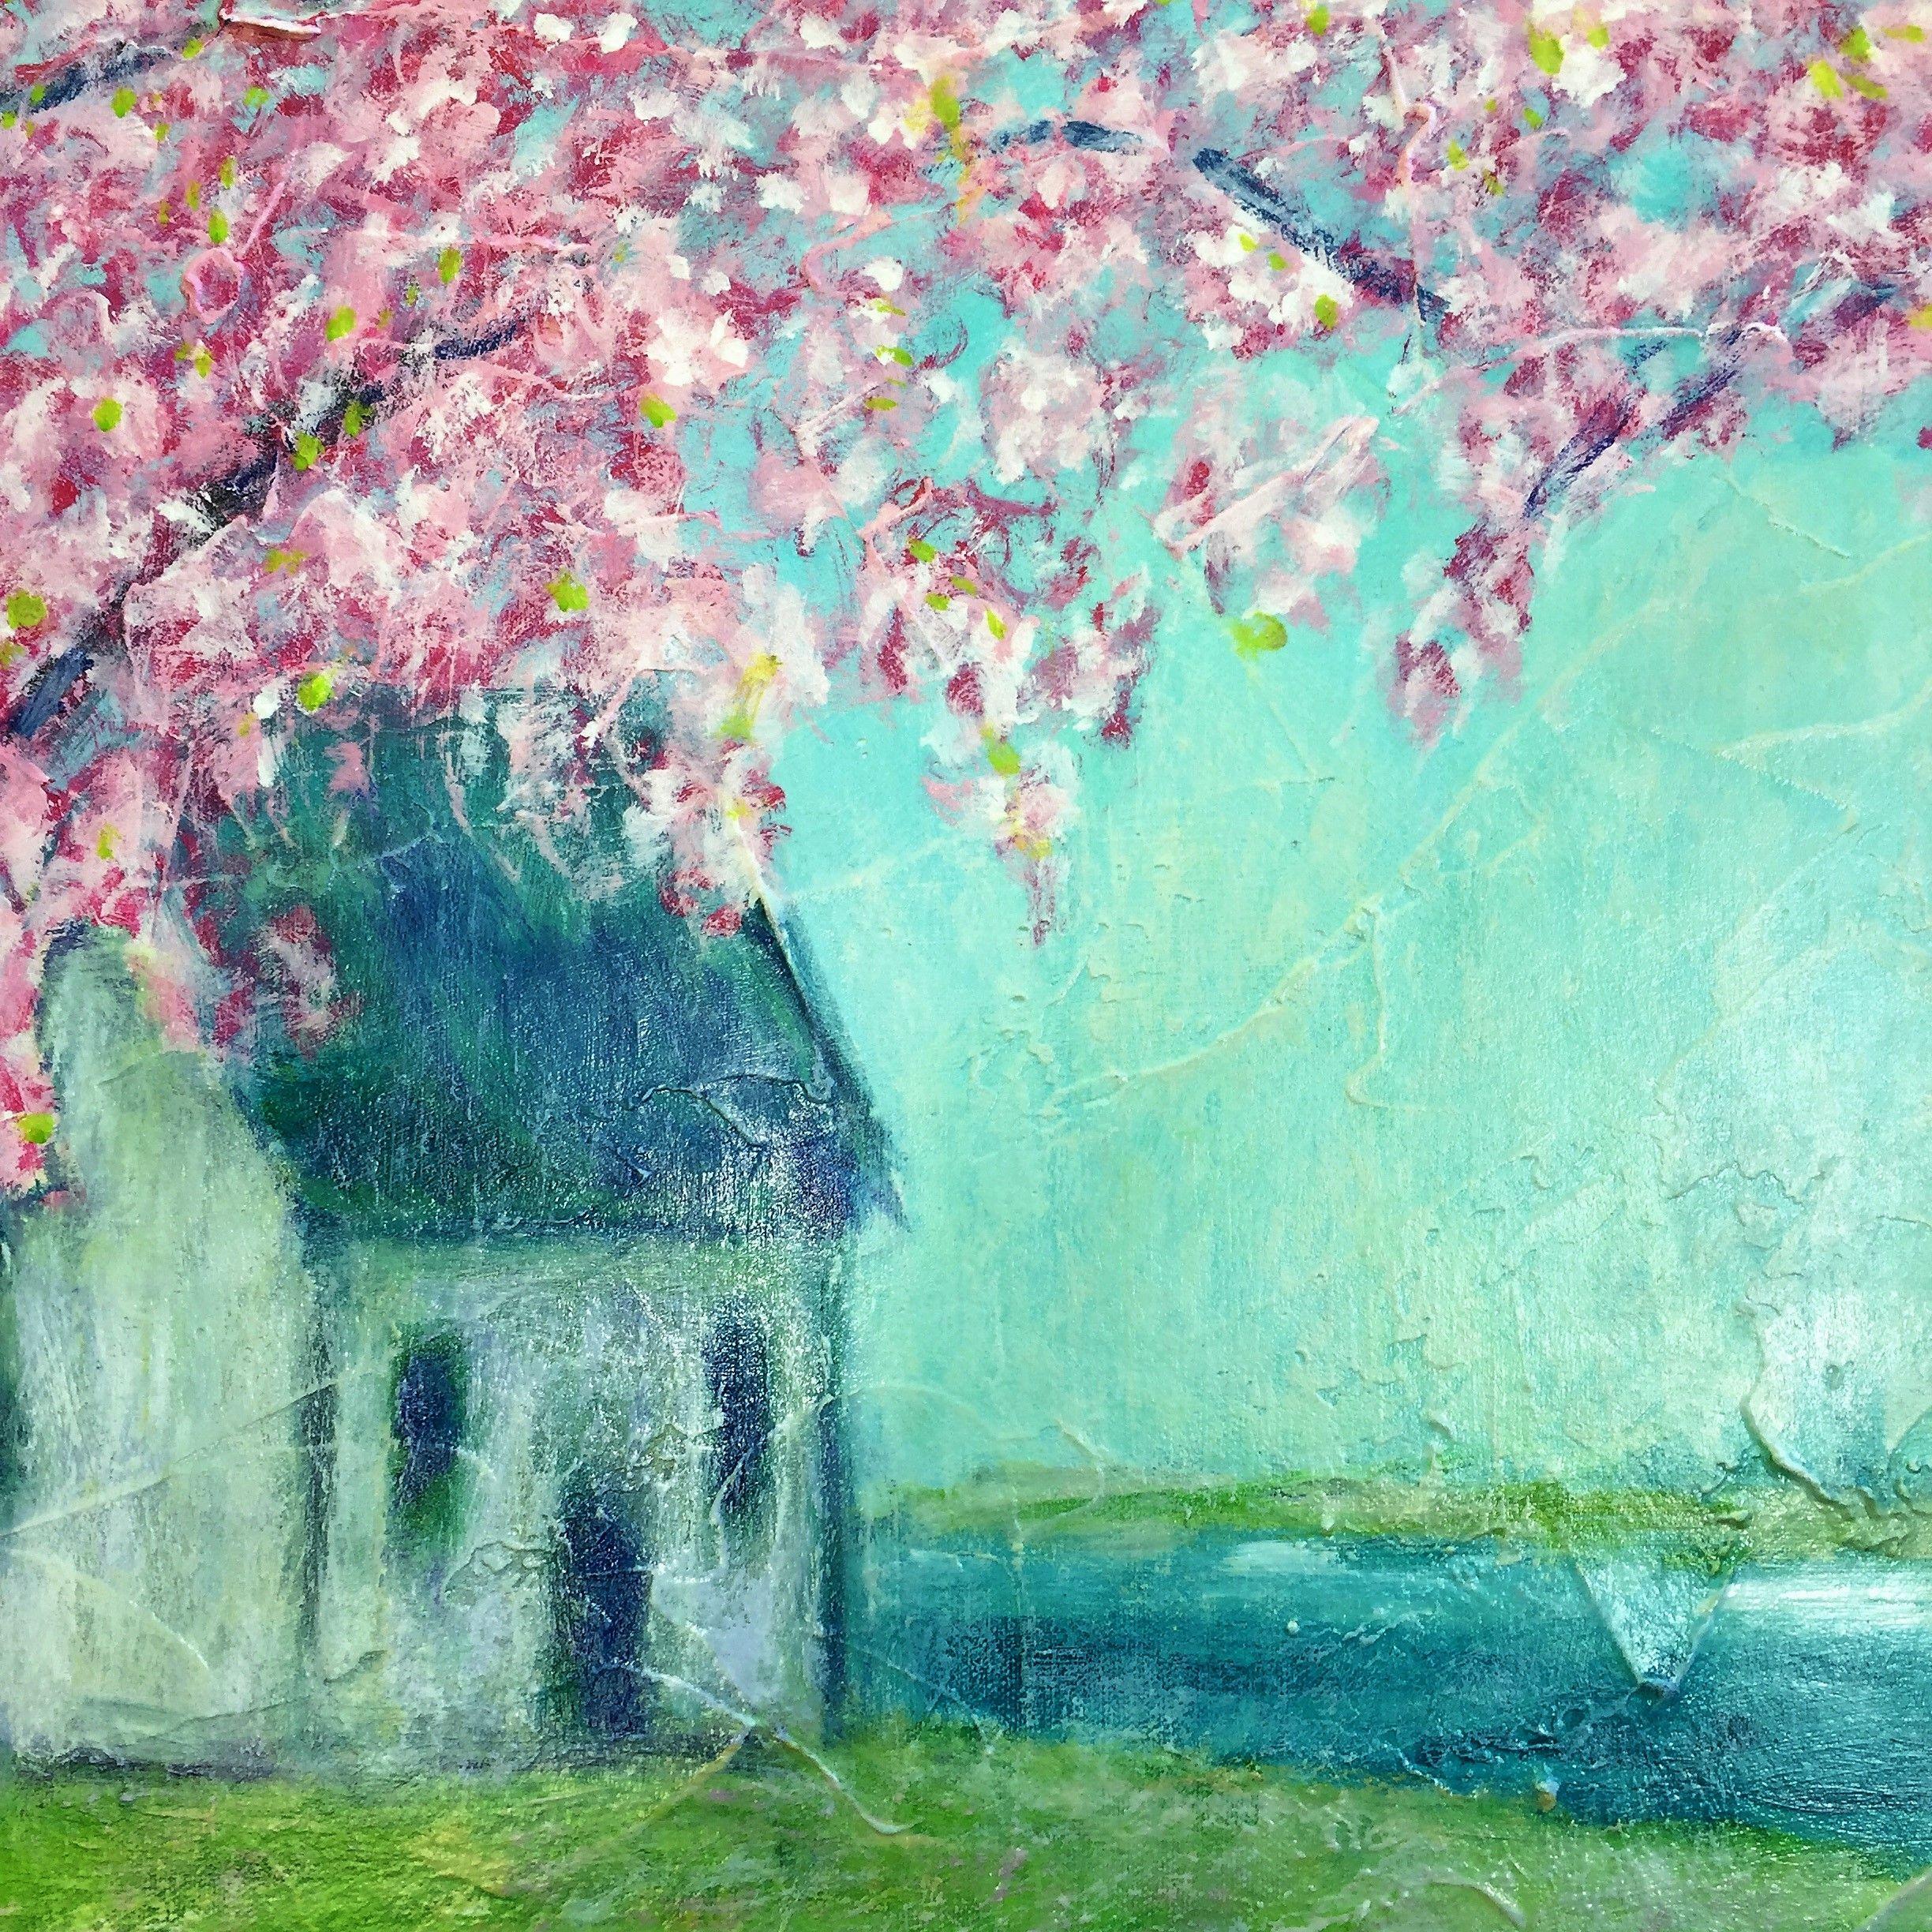 Together under the cherry blossoms    The painting Together under the cherry blossoms is about Volunteering, Friendship, humans working together to build a better world.    I have participate on a project called HistArt and the goal of it was to